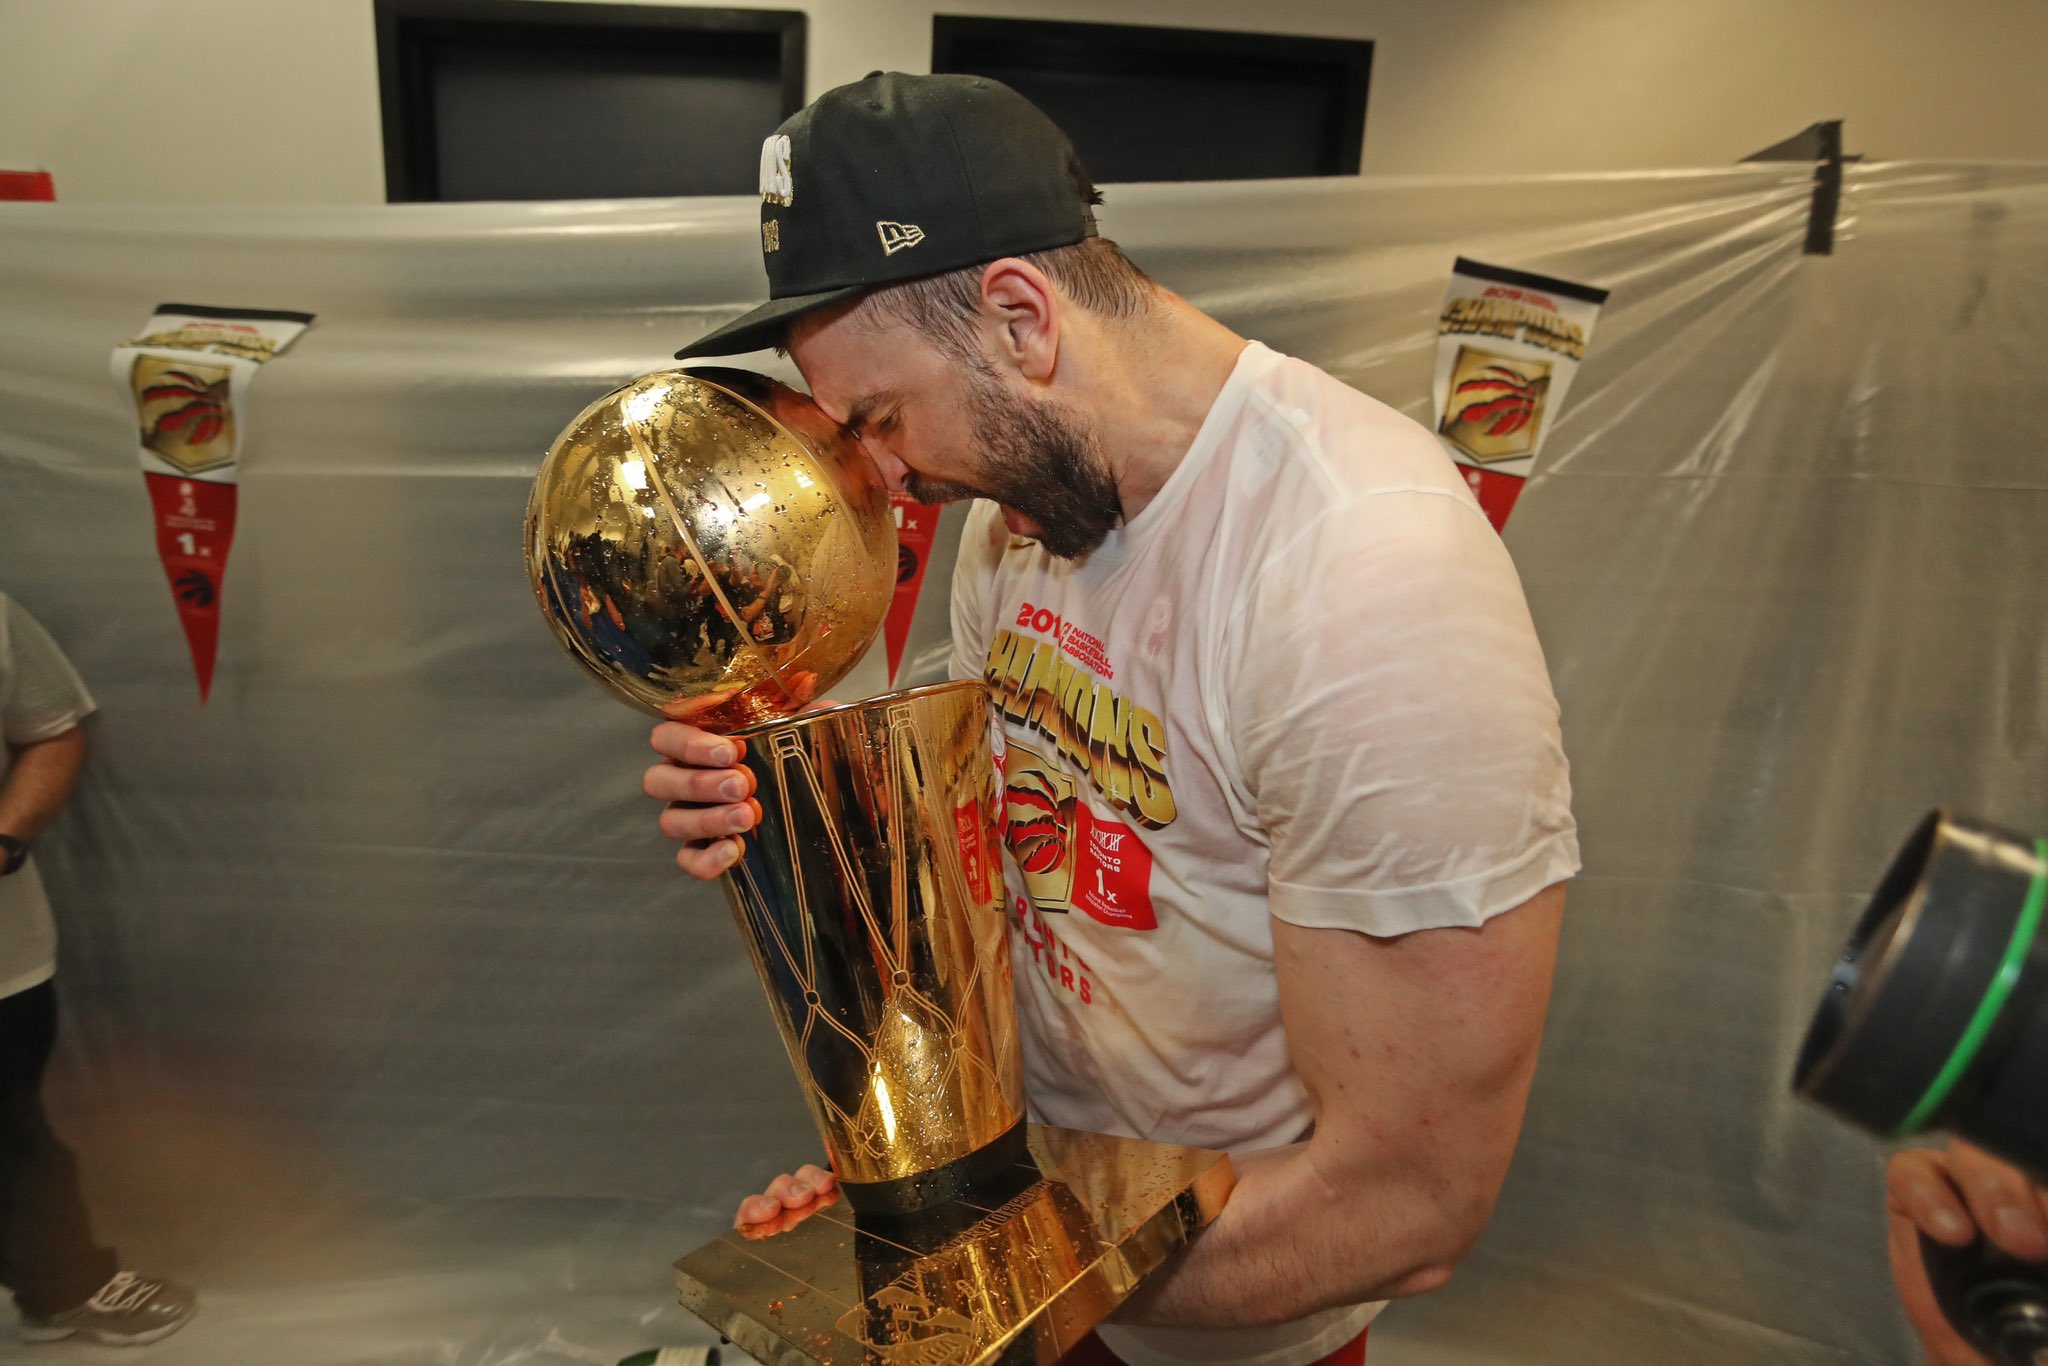 Late but happy birthday to NBA champion Marc Gasol 